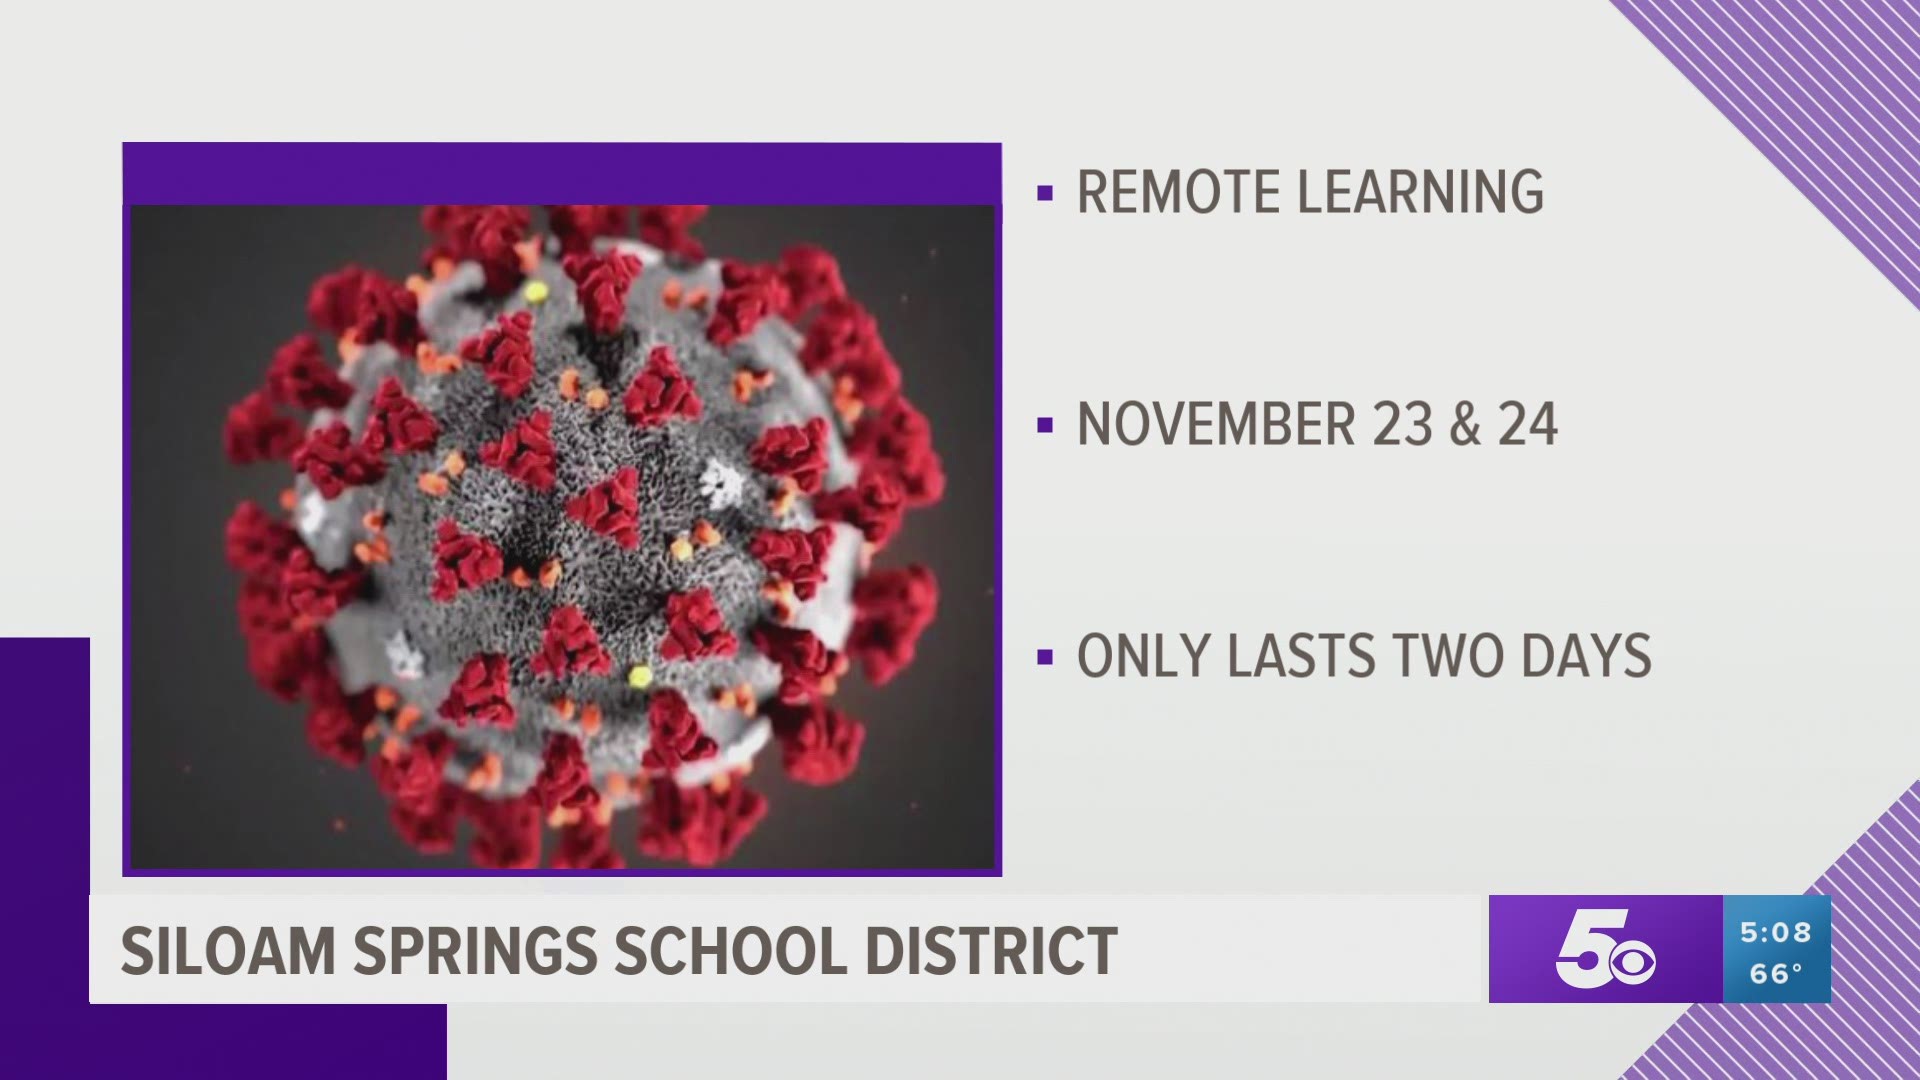 The school district says the move will allow students to have a full week at Thanksgiving with no onsite instruction.